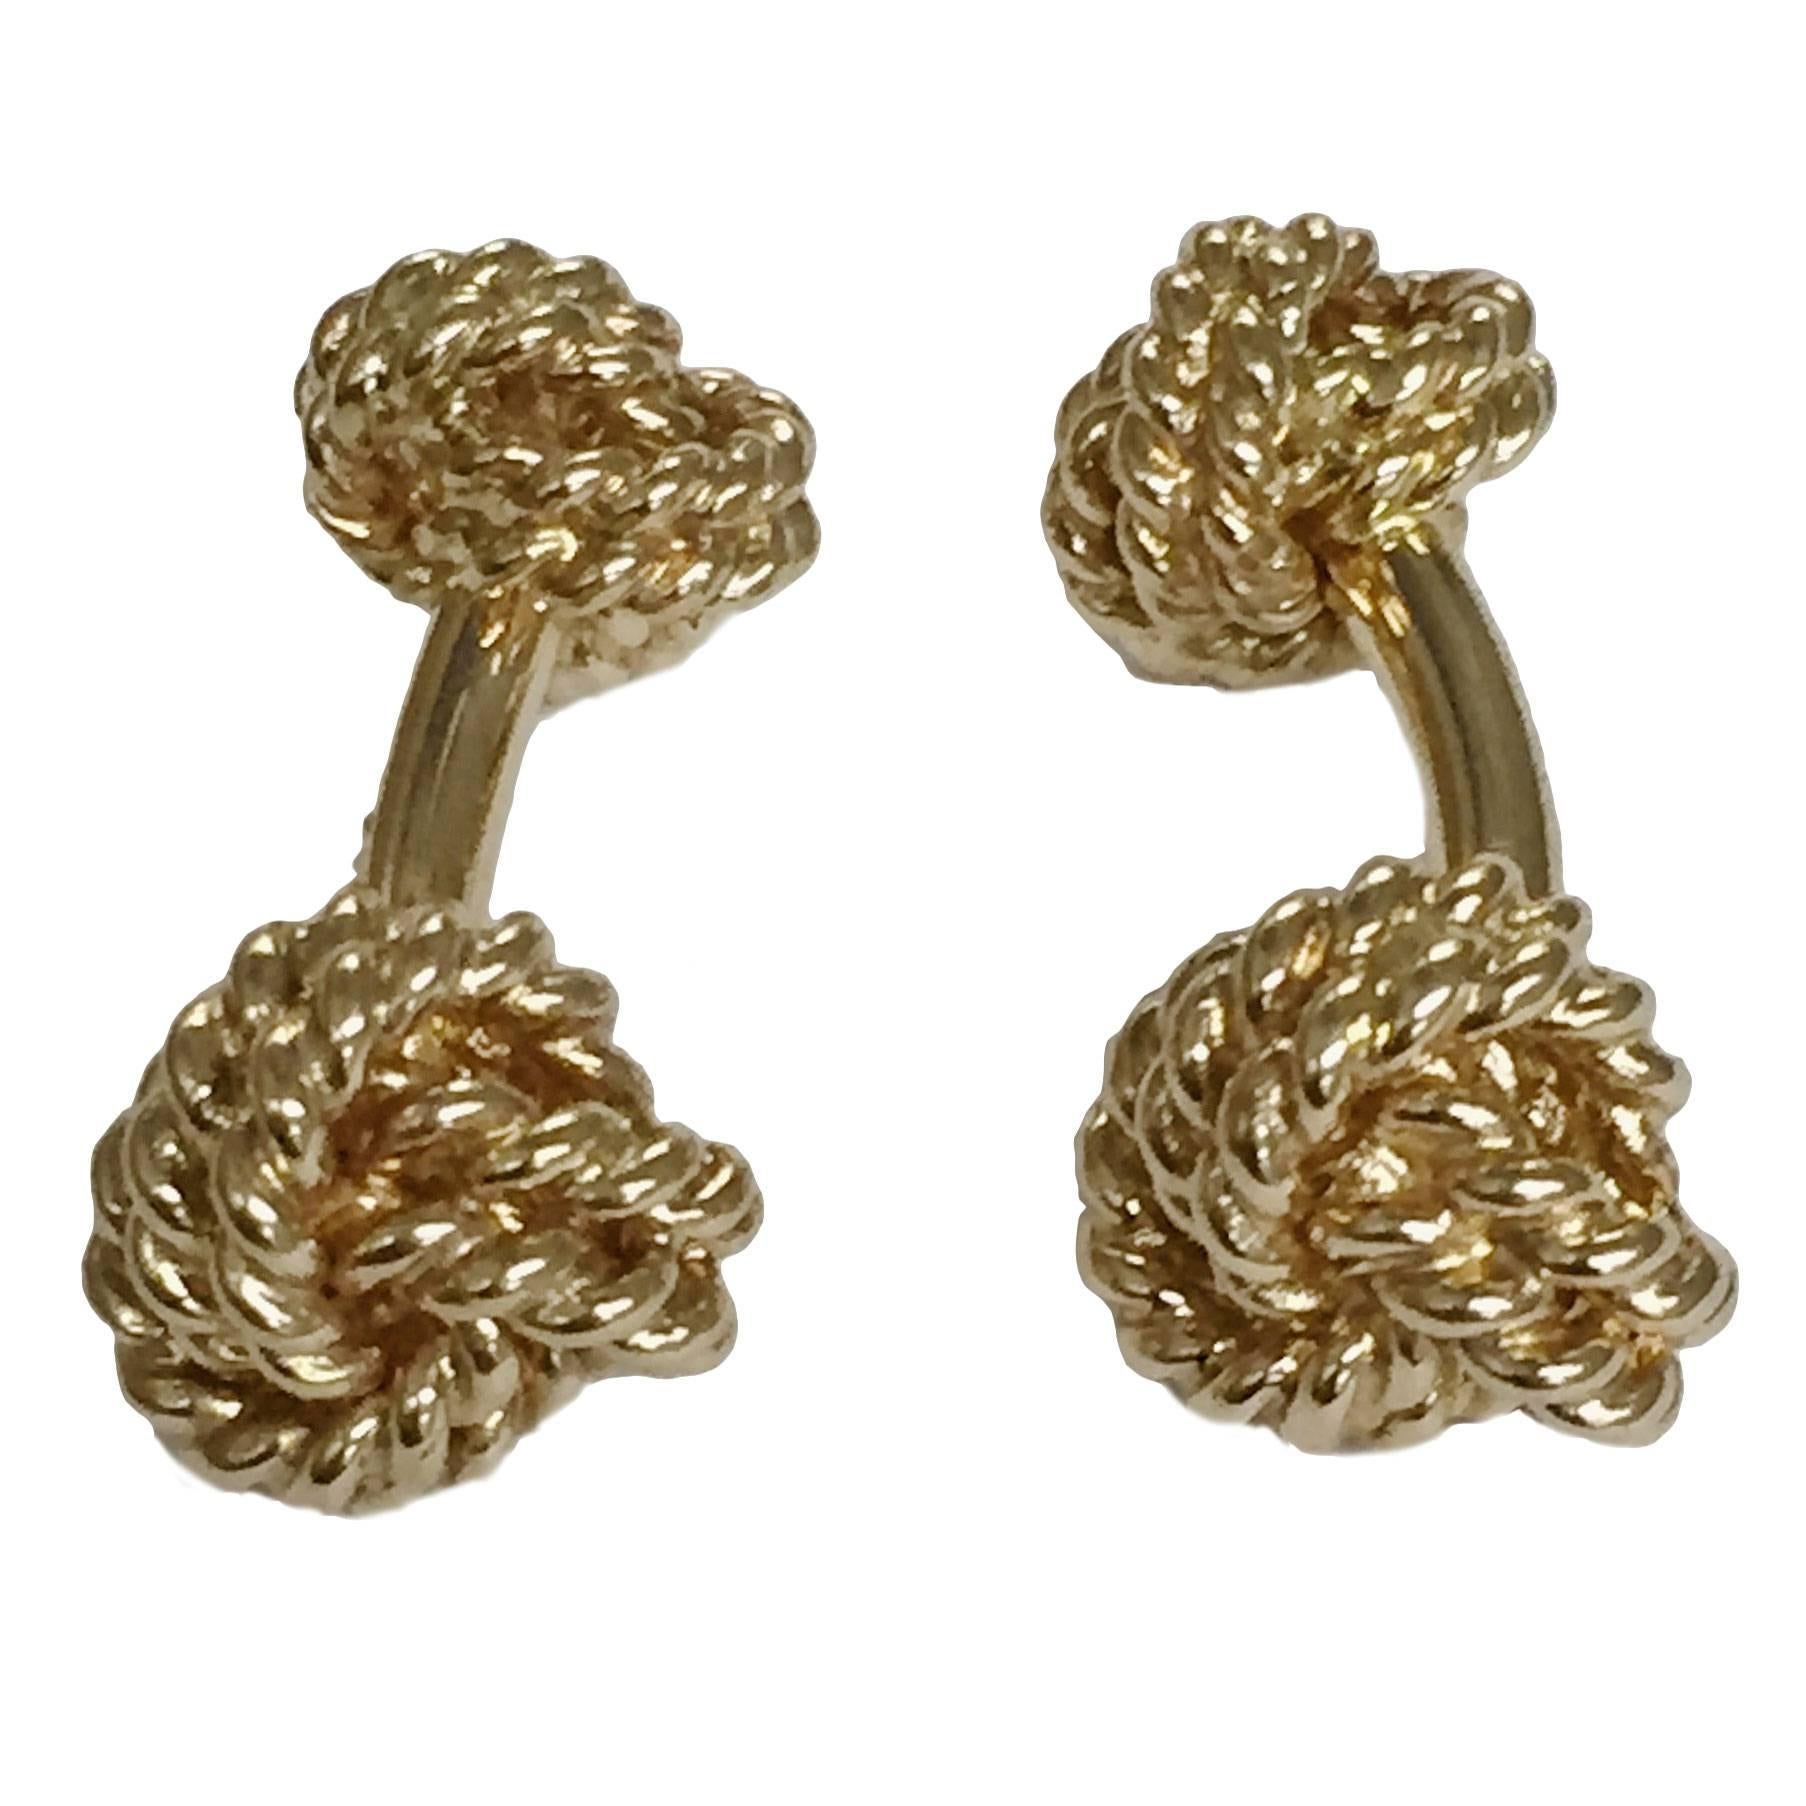 Twisted Gold Large Knot Cufflinks